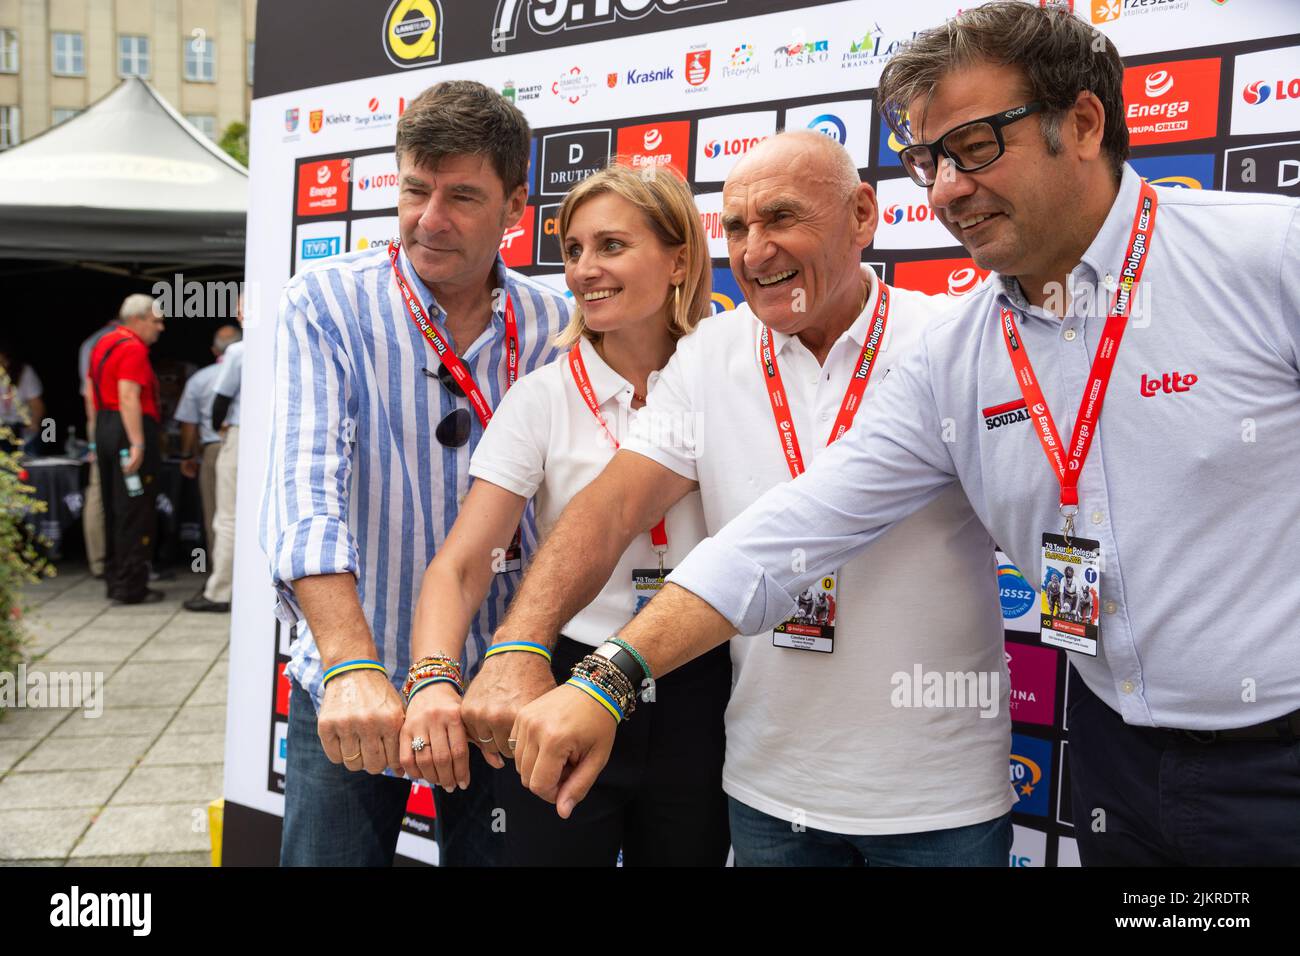 Chelm, Lubelskie, Poland - July 31, 2022: 79 tour de Pologne, President CPA Gianni Bugno with Vice President Agata Lang, Race Director Czeslaw Lang an Stock Photo